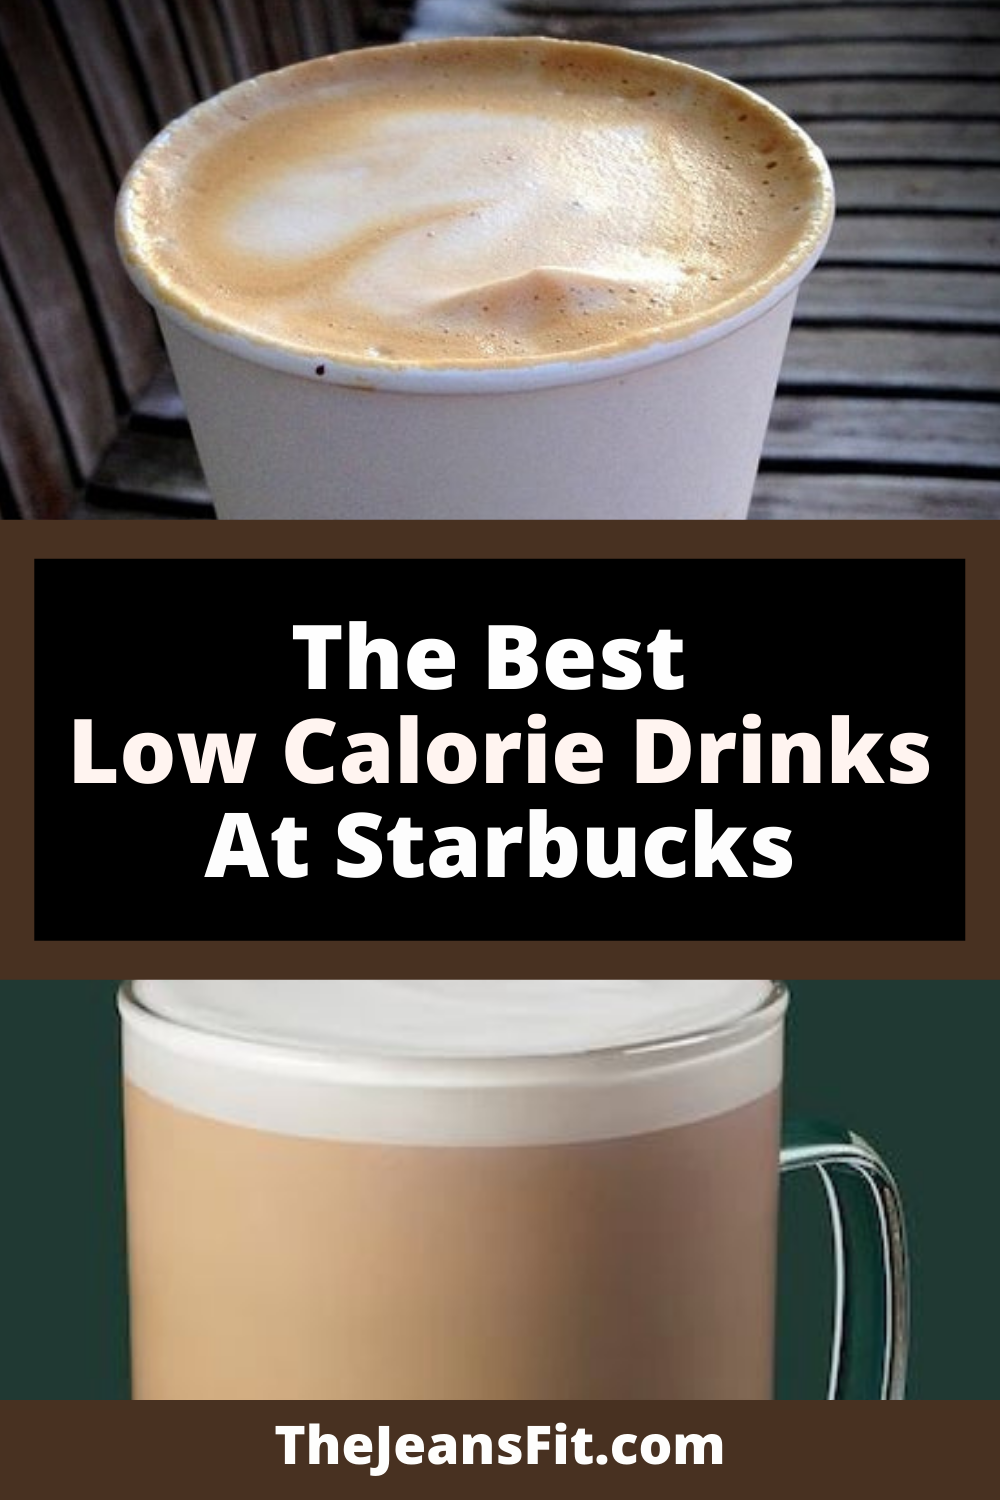 The Best Low Calorie Drinks at Starbucks by The Jeans Fit